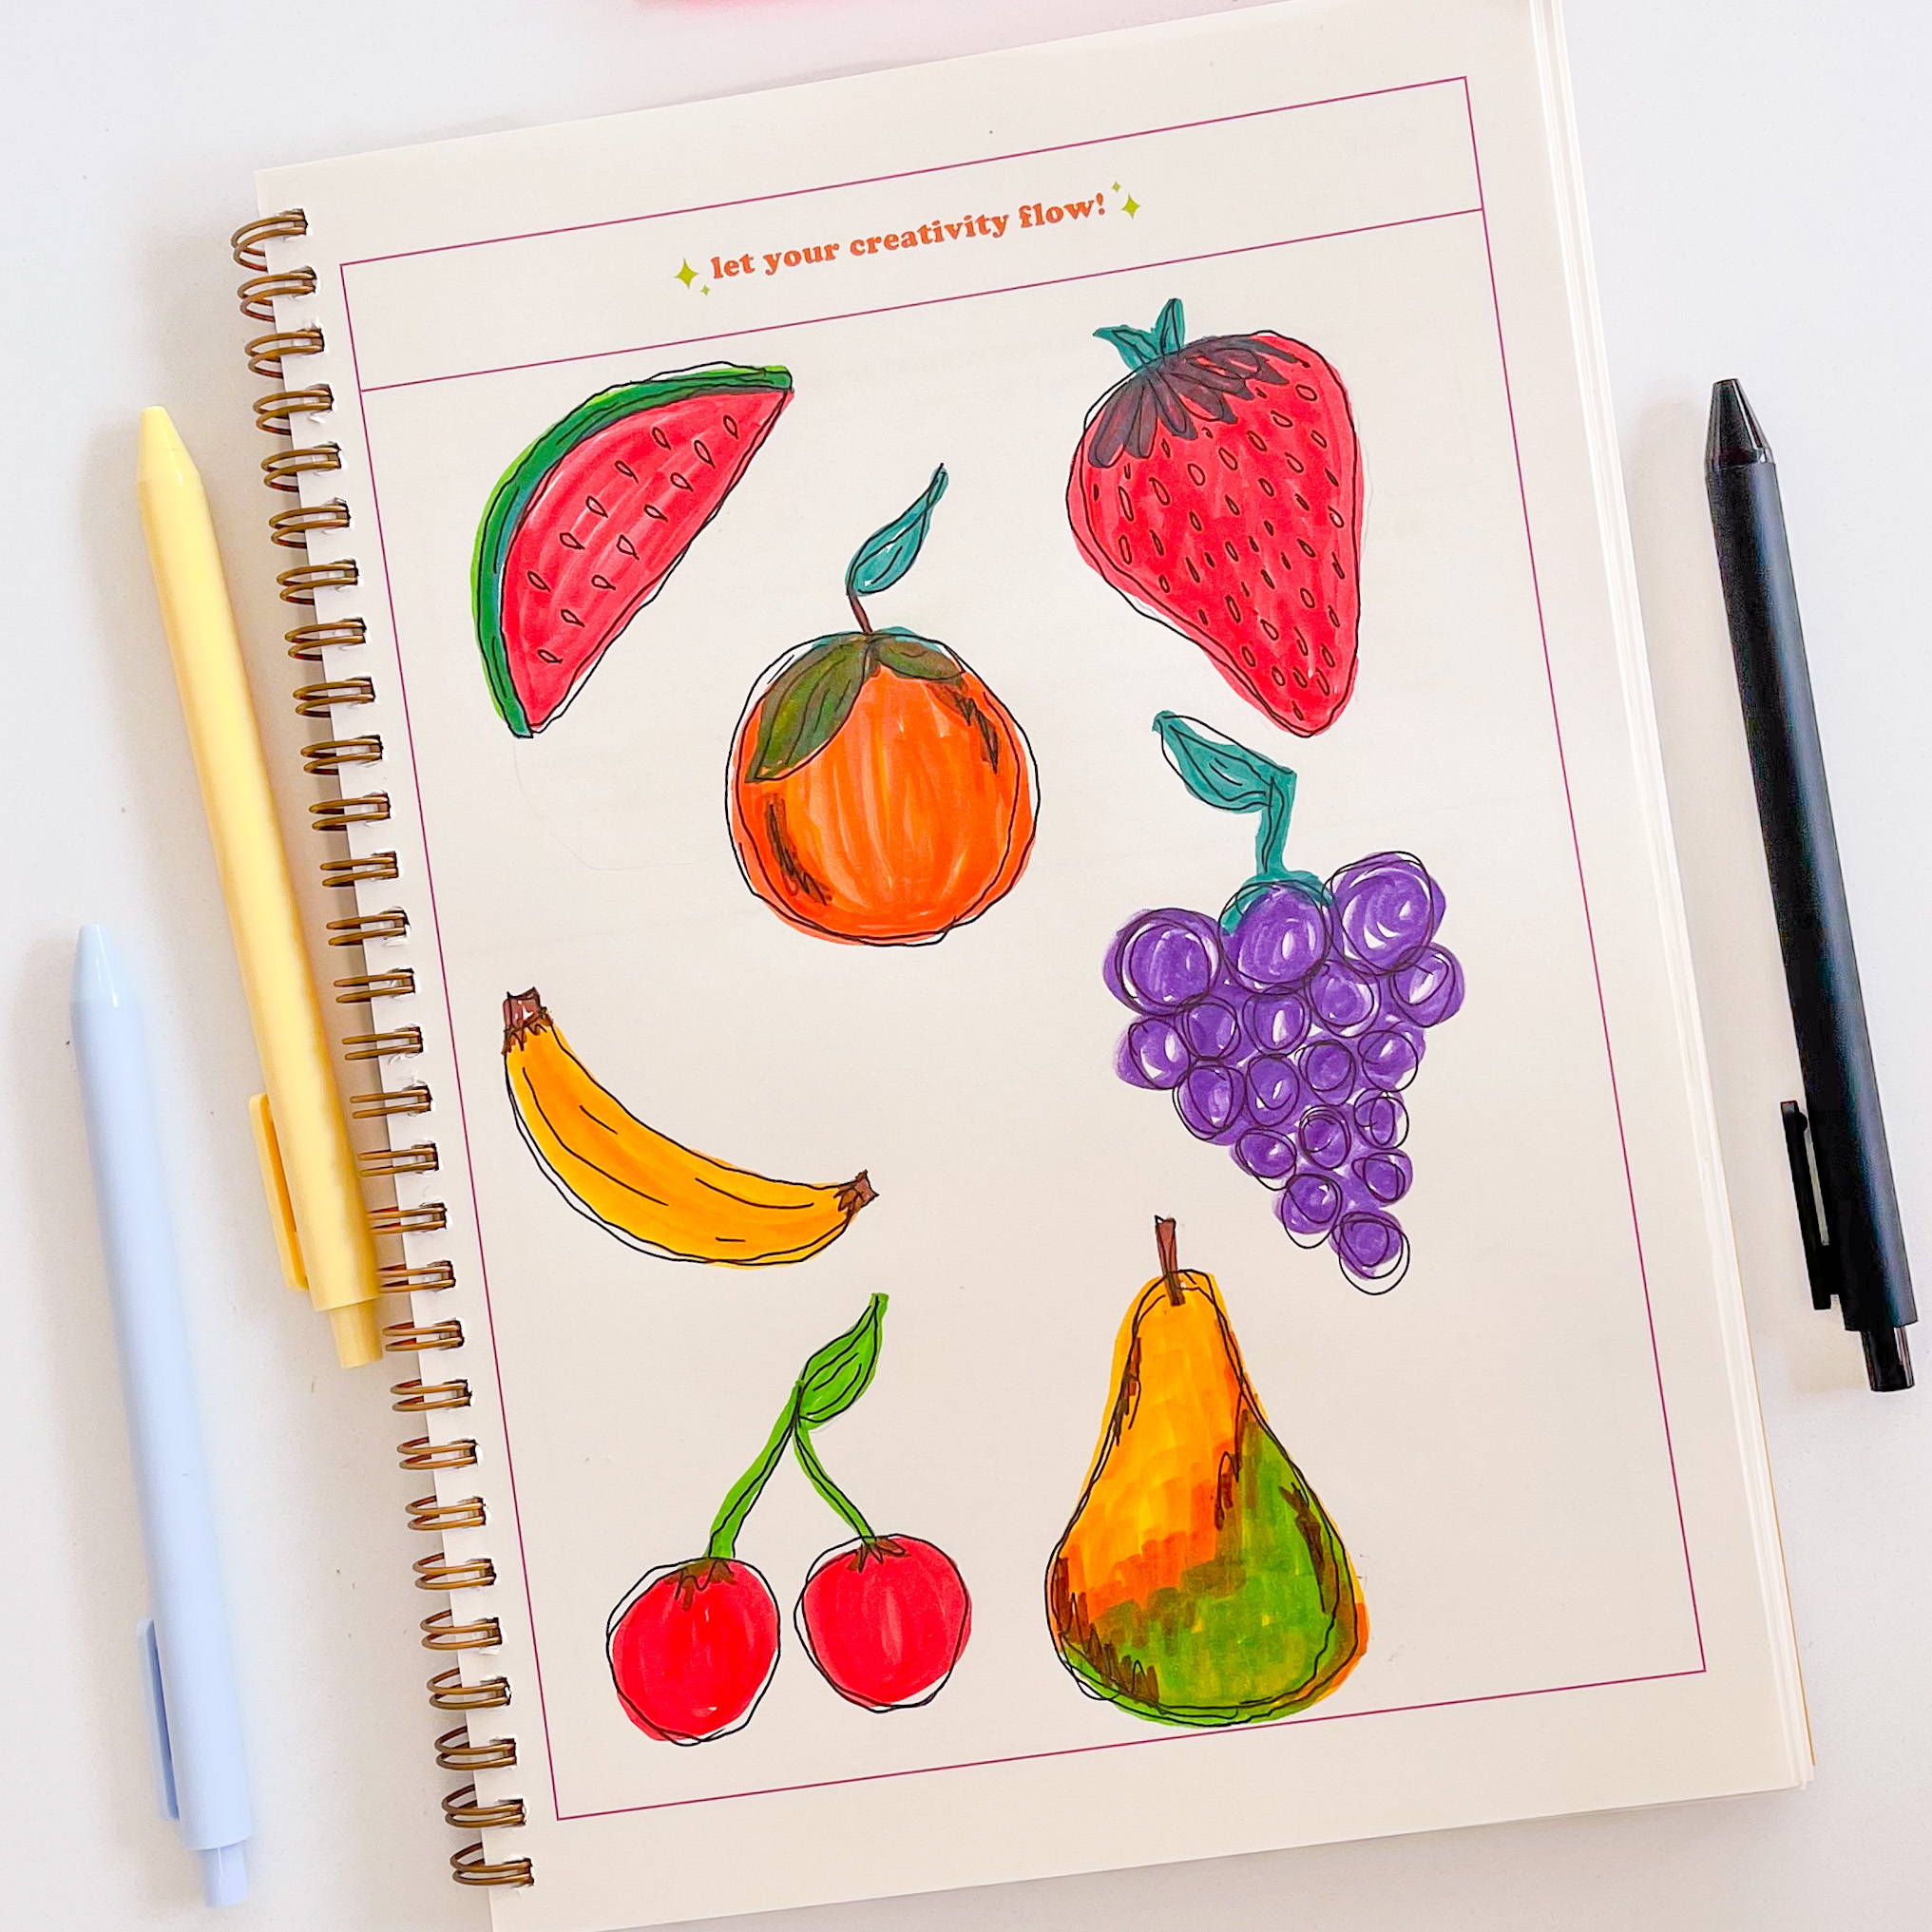 This shows a page out of the Creative Flow Journal. This is the second page of the daily spread and has a large open space with a border around it so you can let your creativity flow! As an example, there is a drawing of different fruit like a strawberry, pear, banana, grapes, cherry, and orange. 